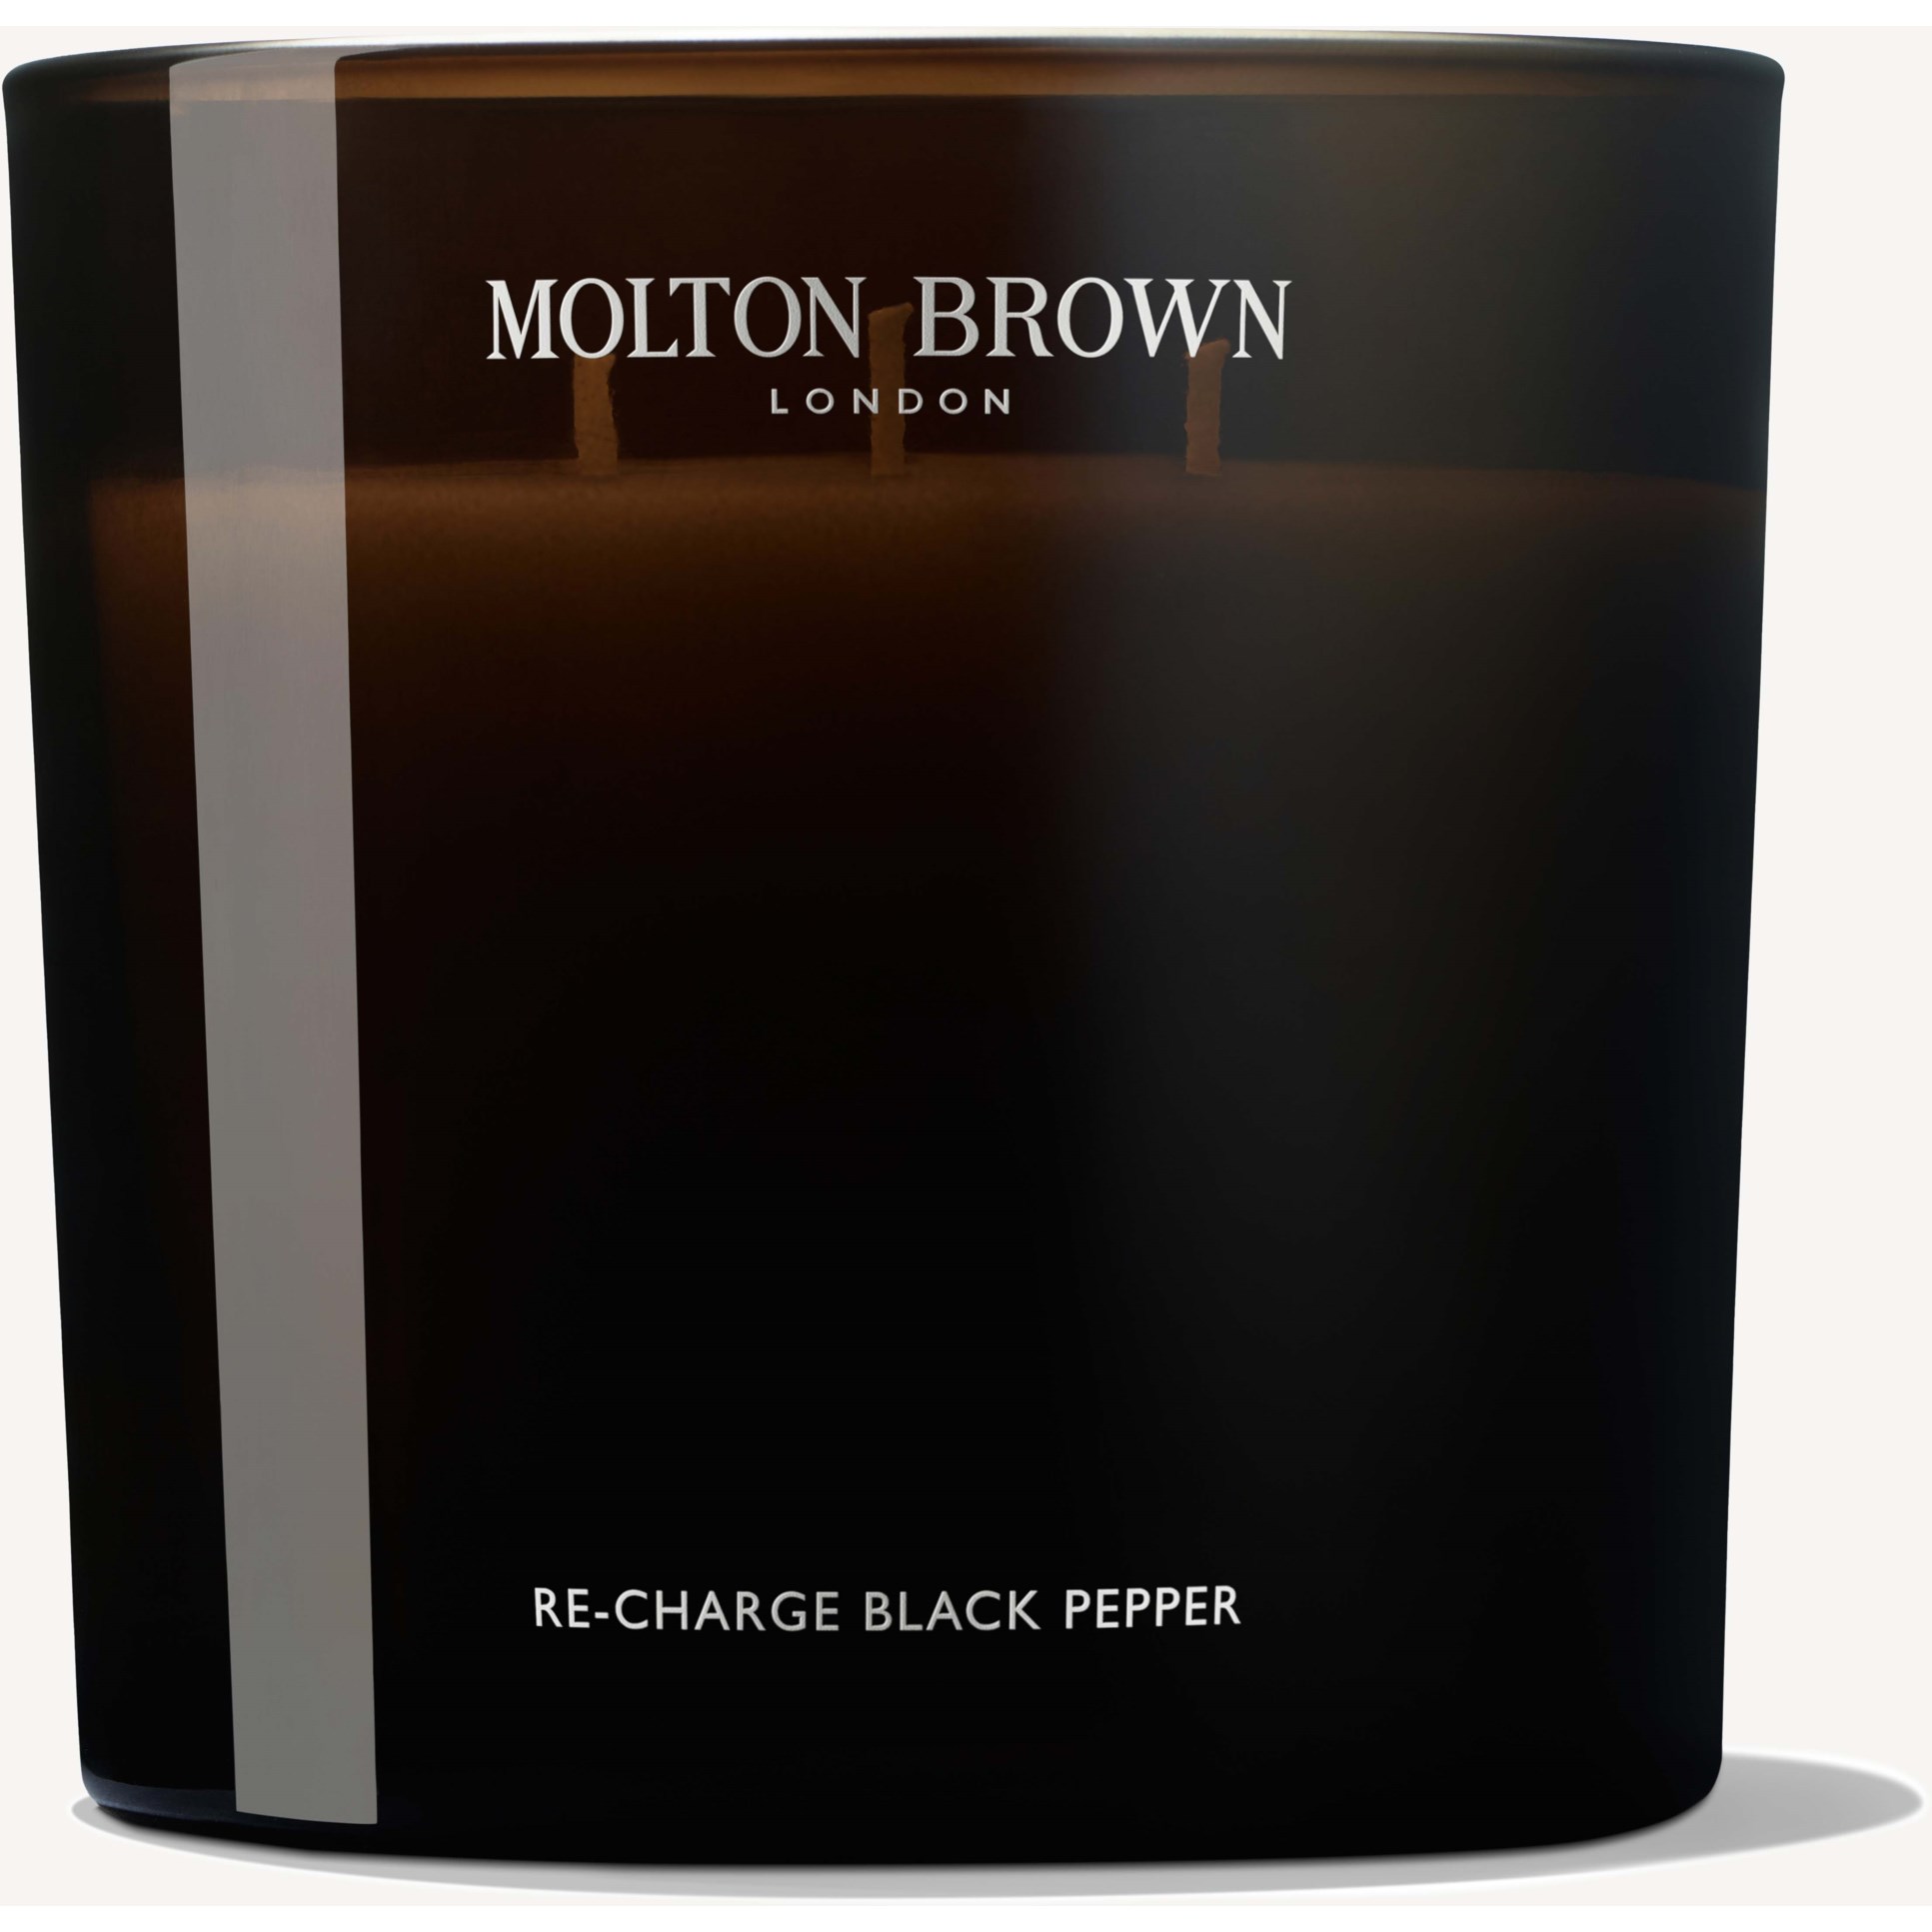 Molton Brown Re-Charge Black Pepper Luxury 3 Wick Candle